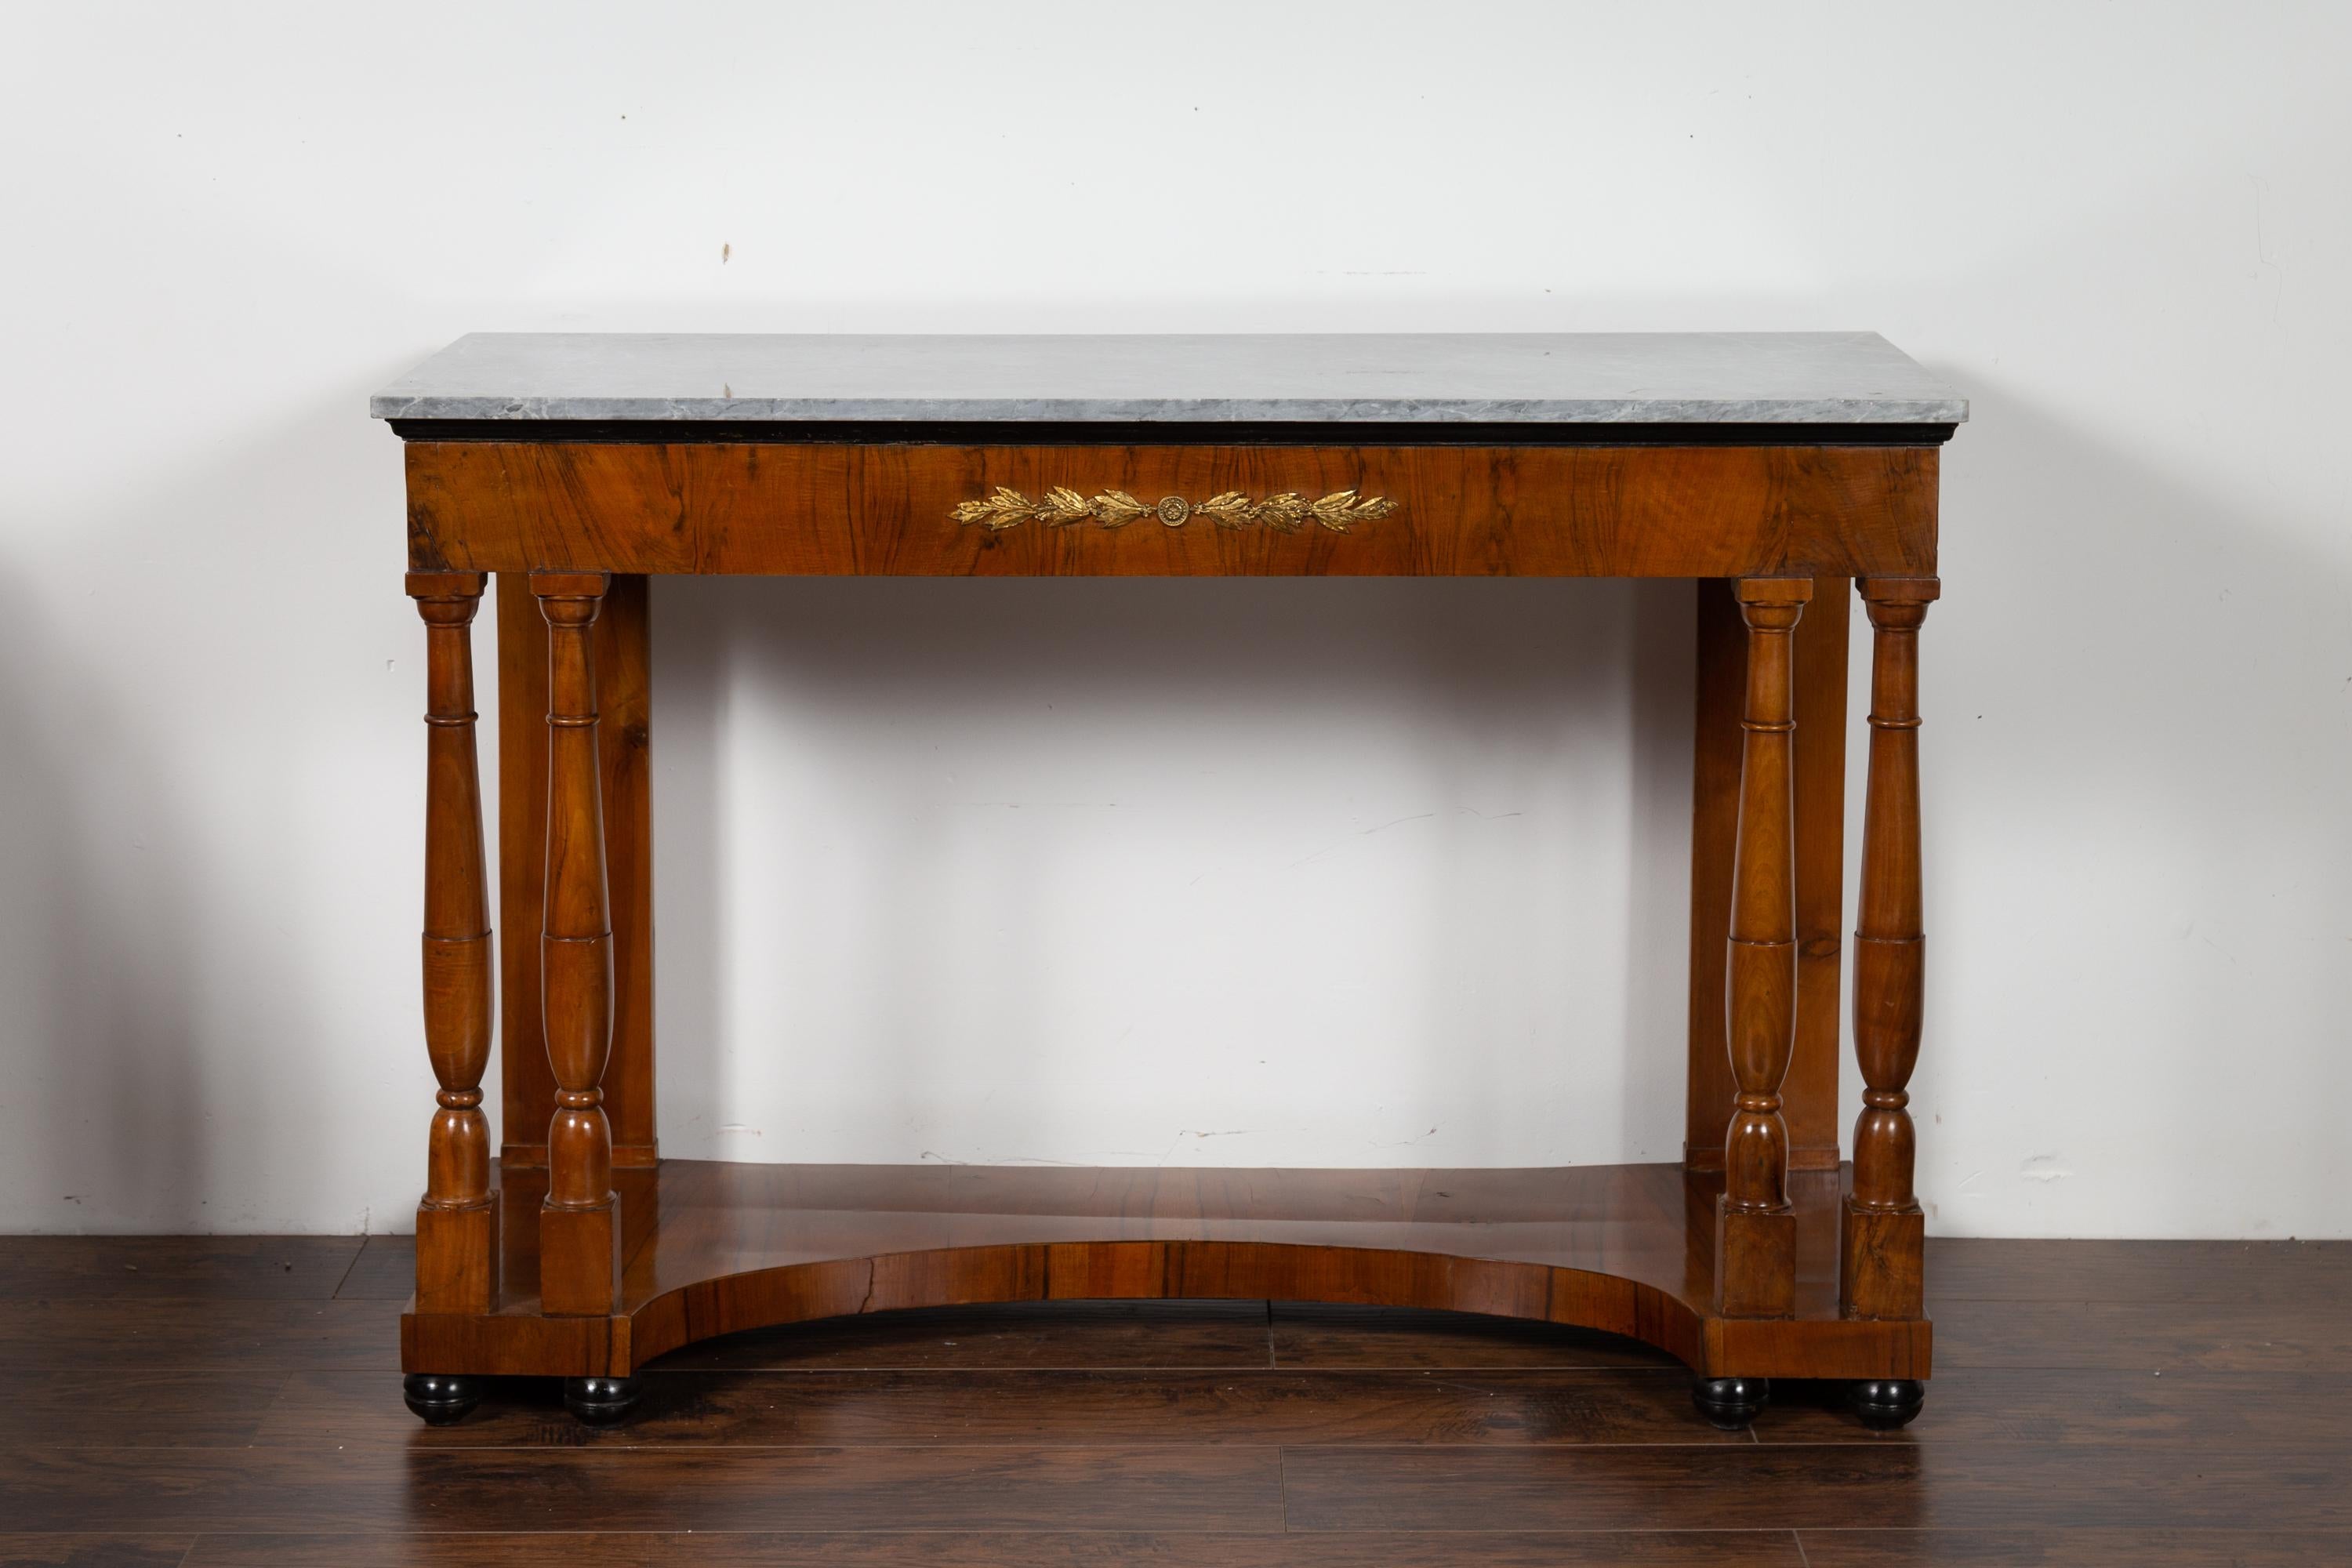 Pair of French 1860s Napoleon III Period Walnut Console Tables with Marble Tops For Sale 1